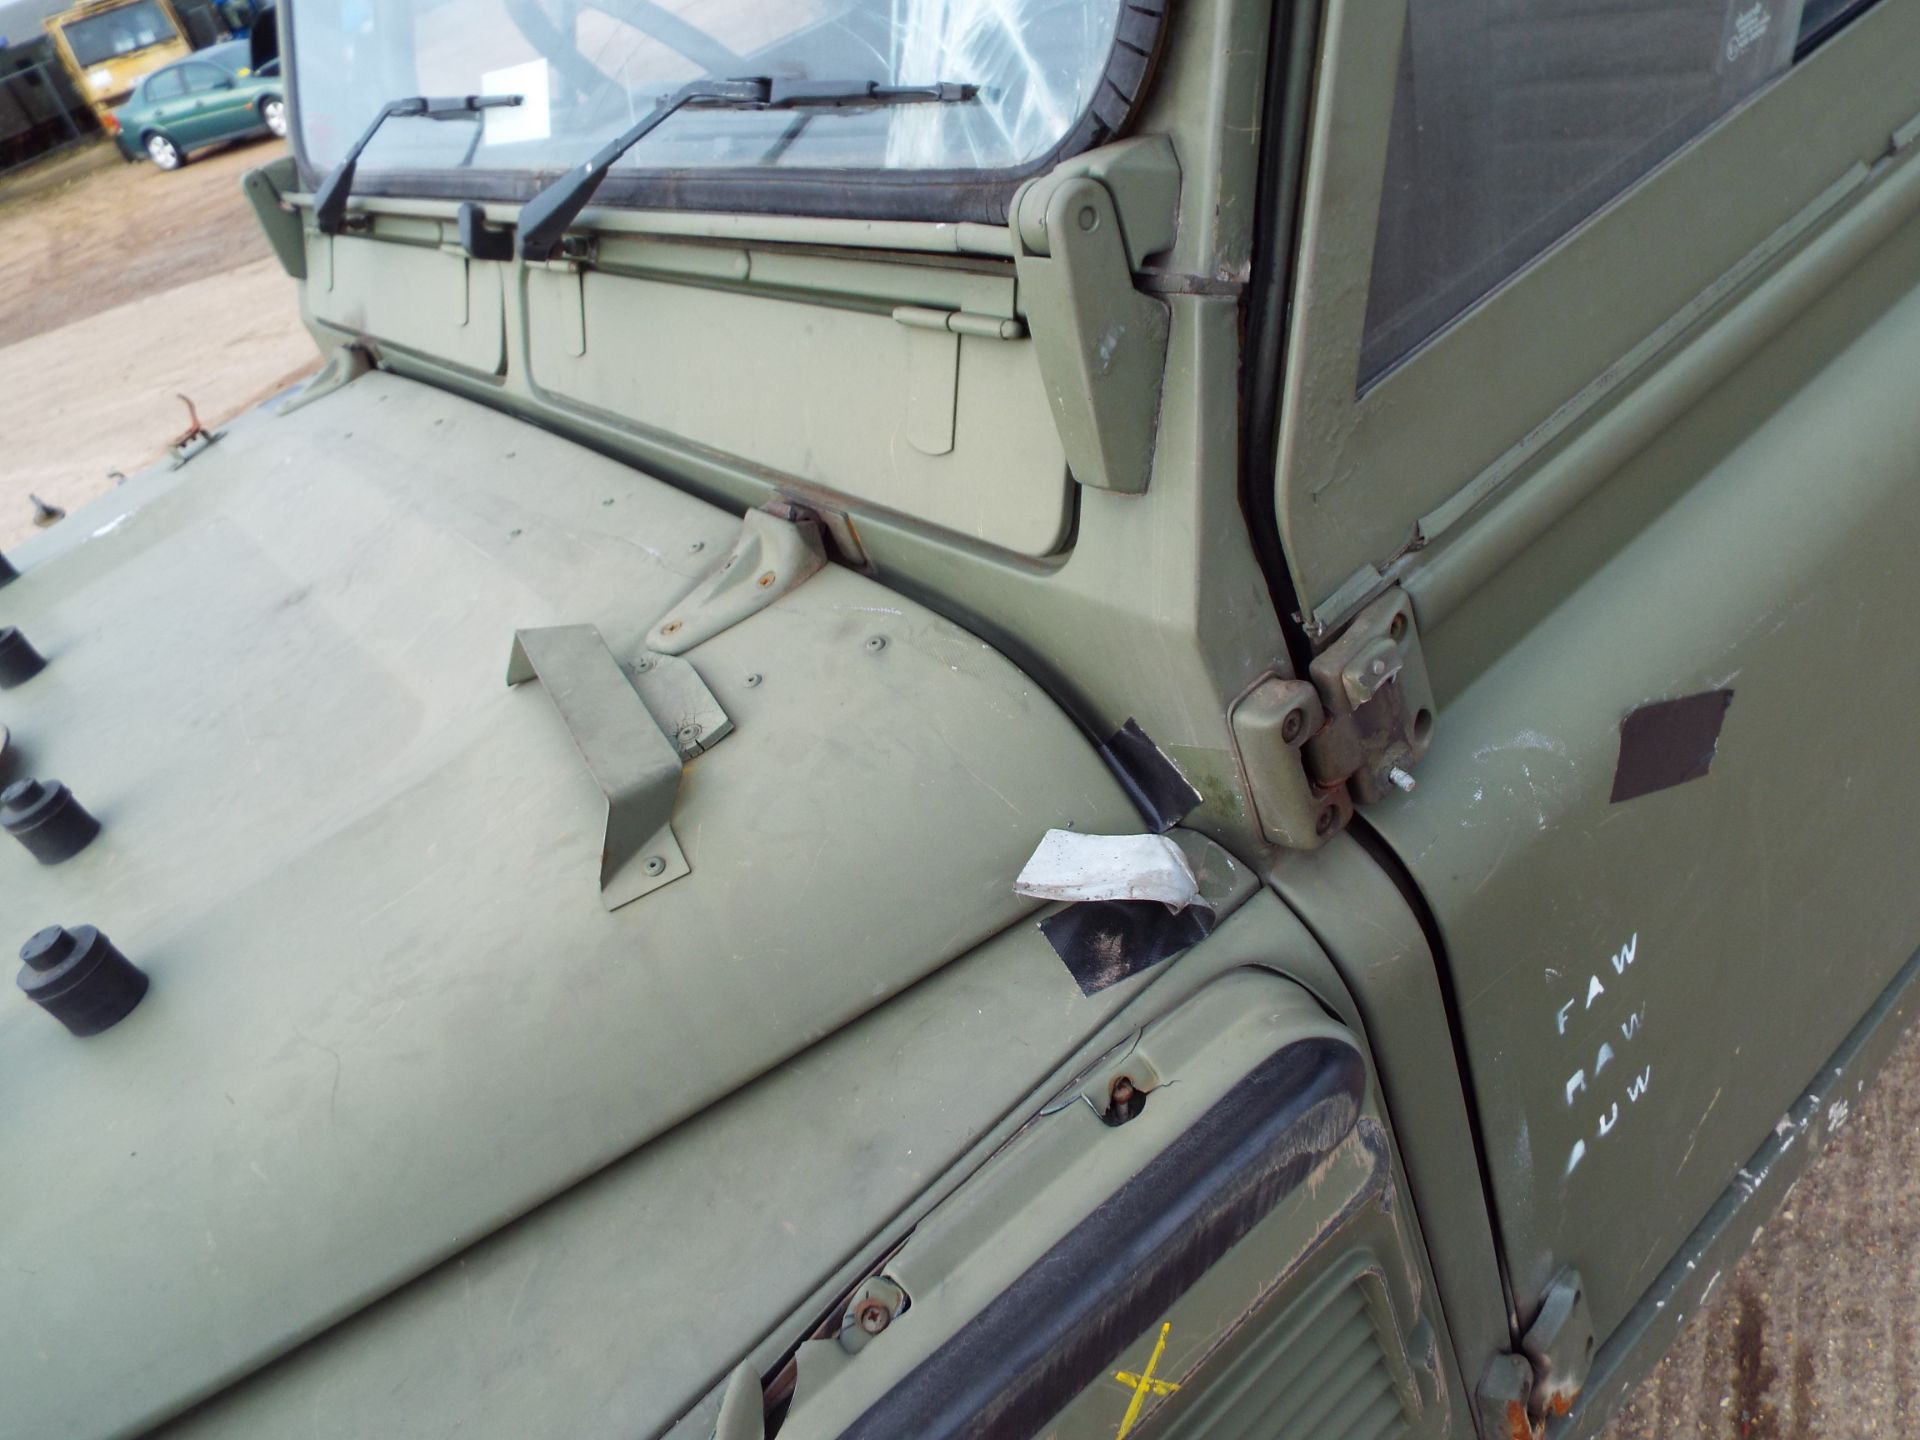 Military Specification Land Rover Wolf 110 Hard Top - Image 9 of 25